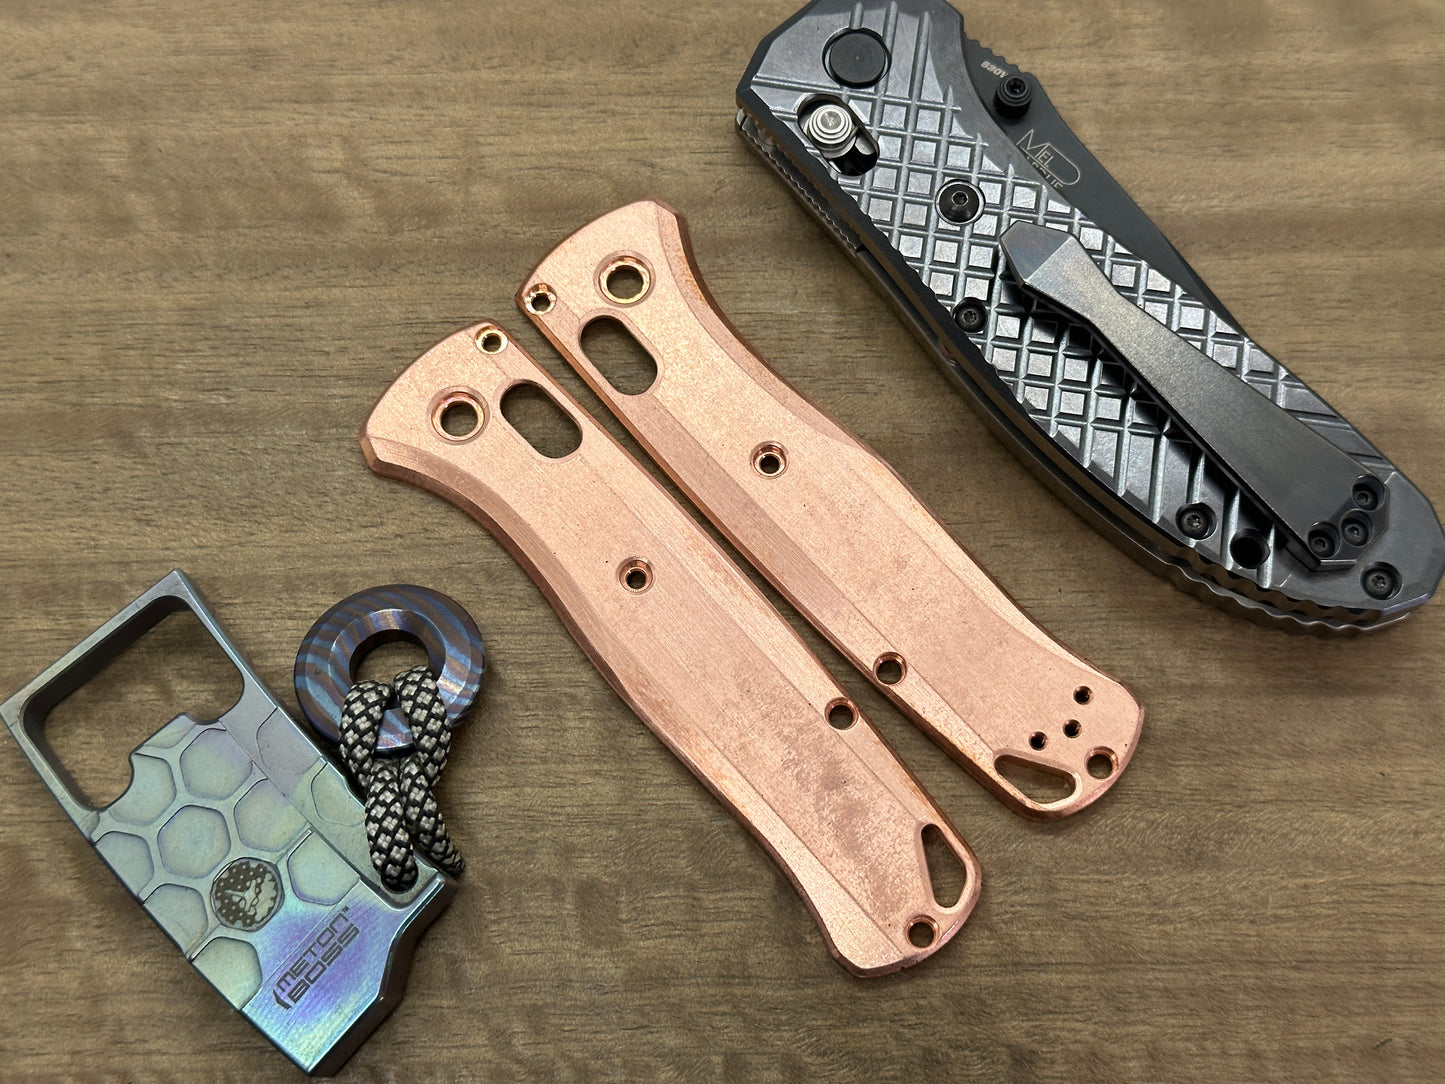 Stone Washed Copper Scales for Benchmade Bugout 535